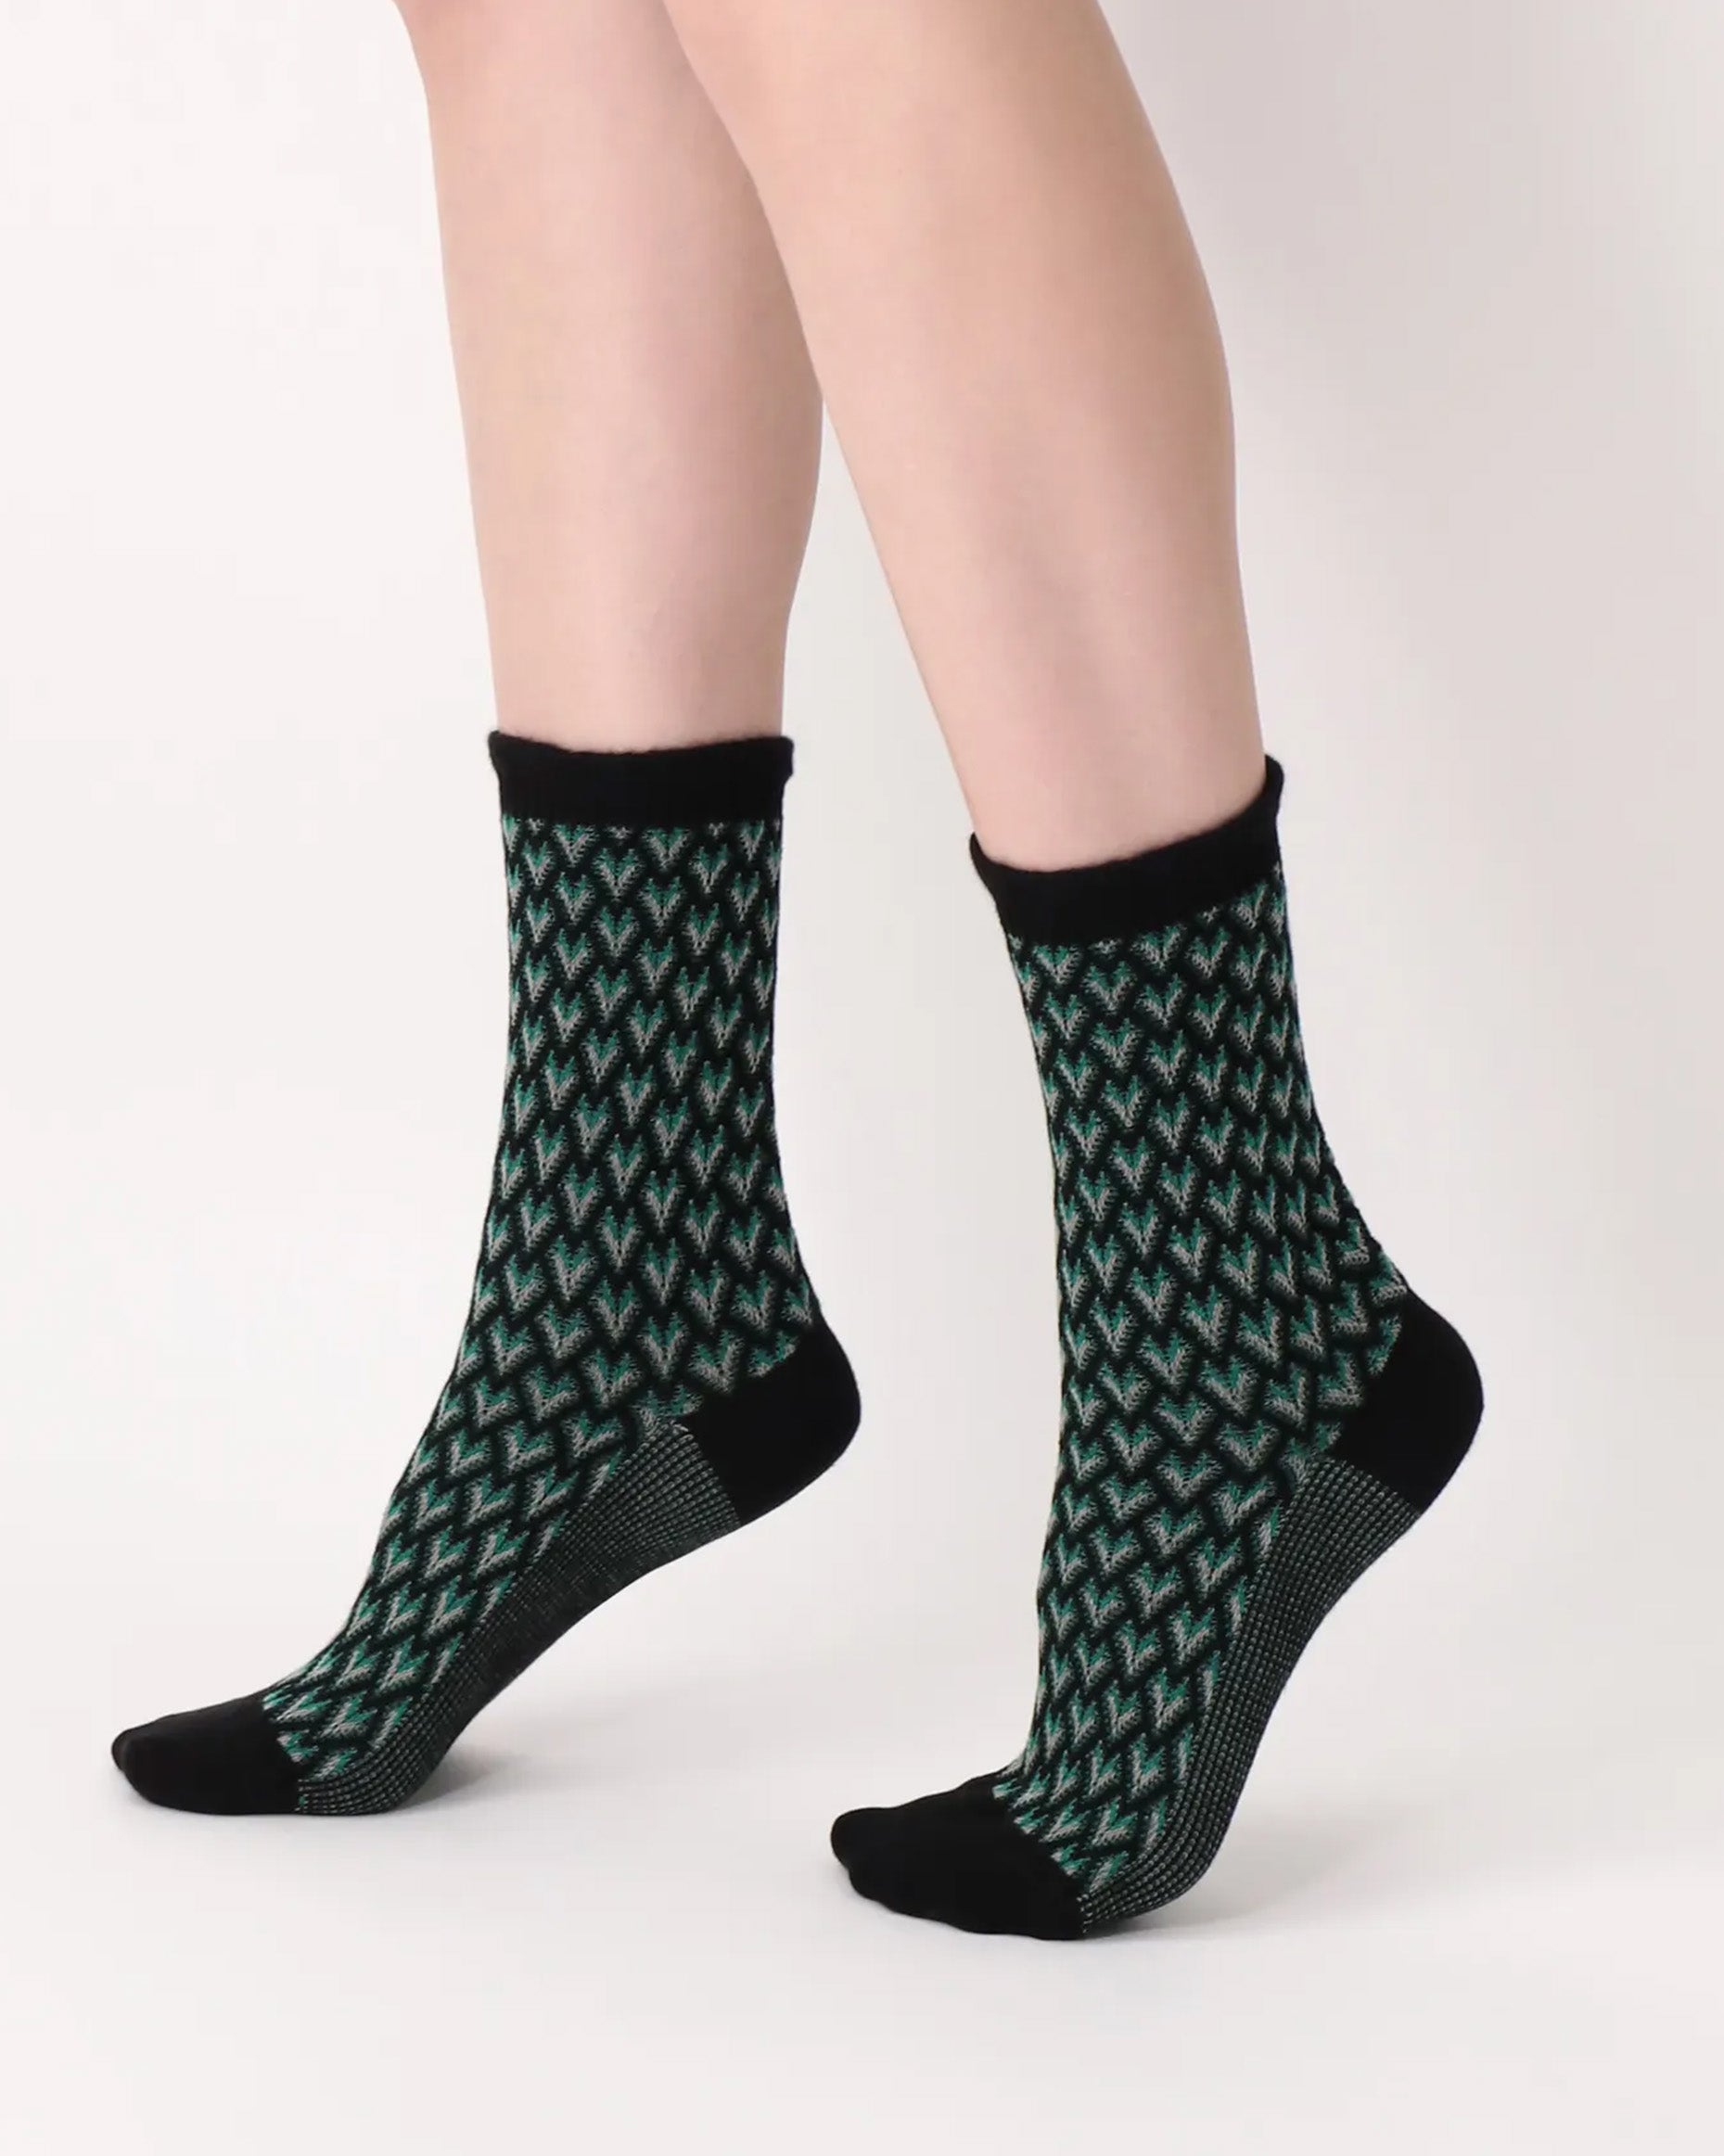 Oroblù Jacquard Deco Ankle Sock - Black cotton mix fashion light knitted ankle socks with a three tone jacquard pattern in shades of green and slight ruffled cuff.